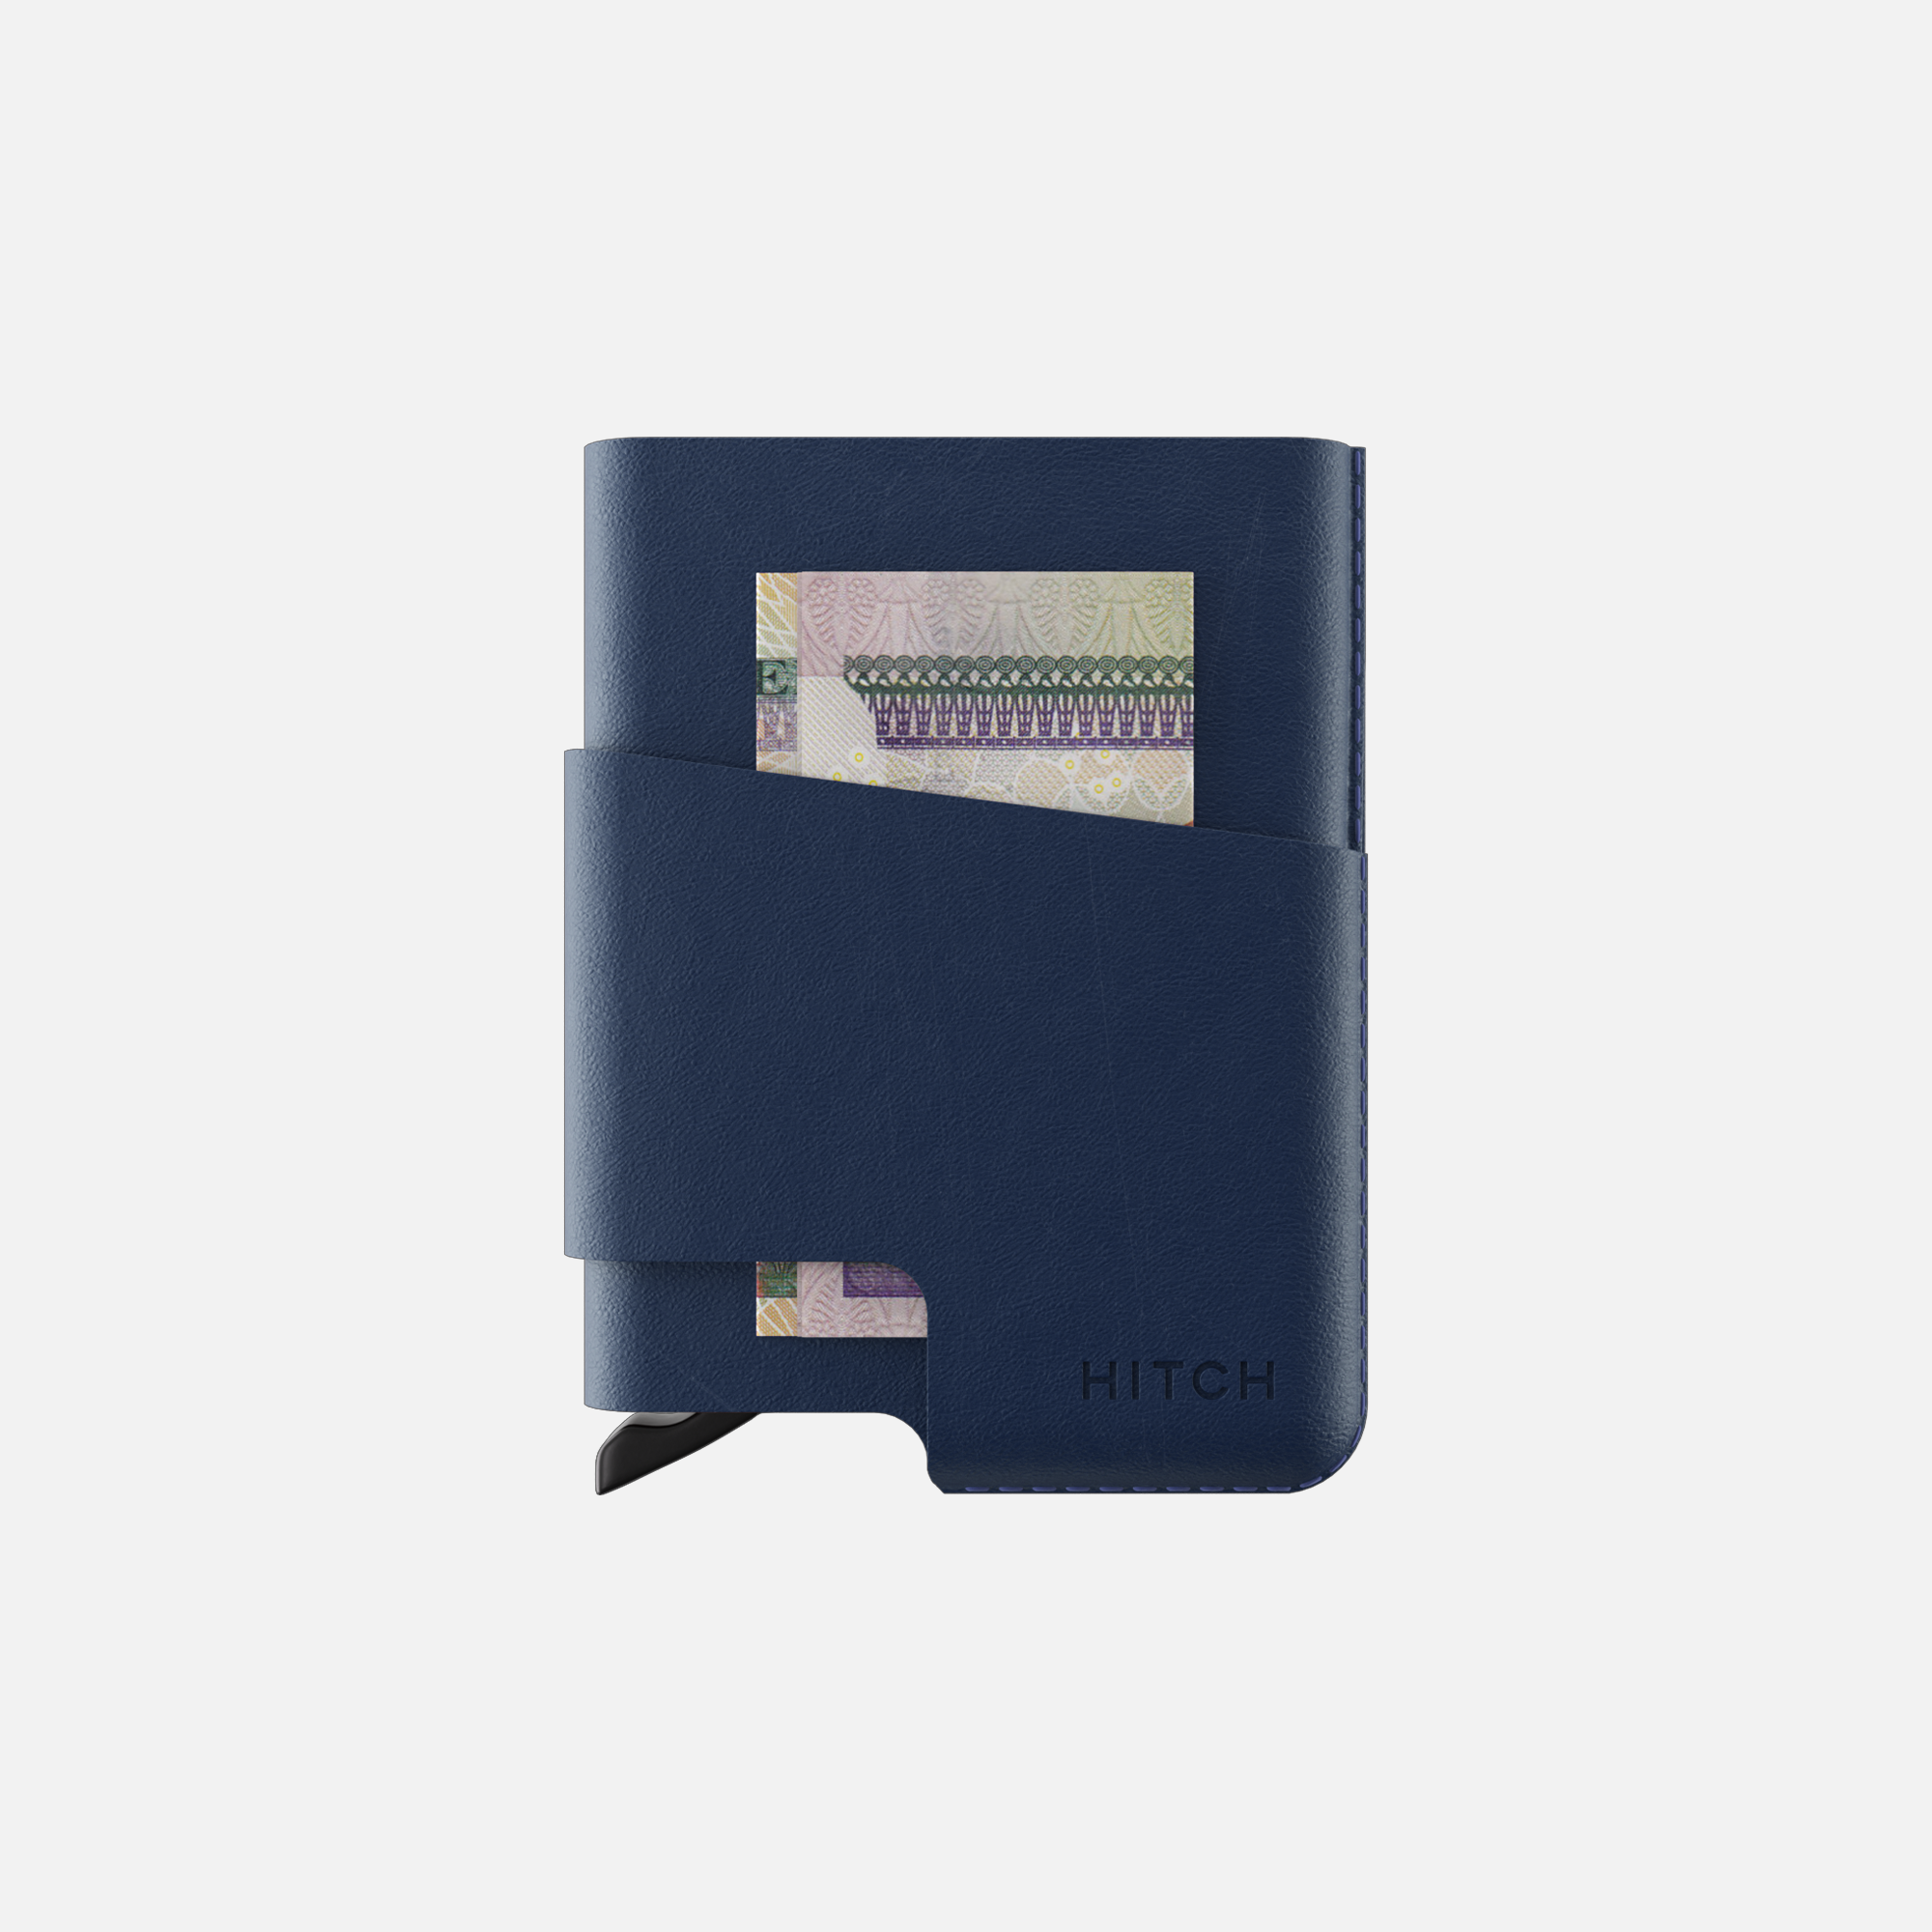 CUT-OUT Cardholder - RFID Block Featured - Handmade Natural Genuine Leather - Navy